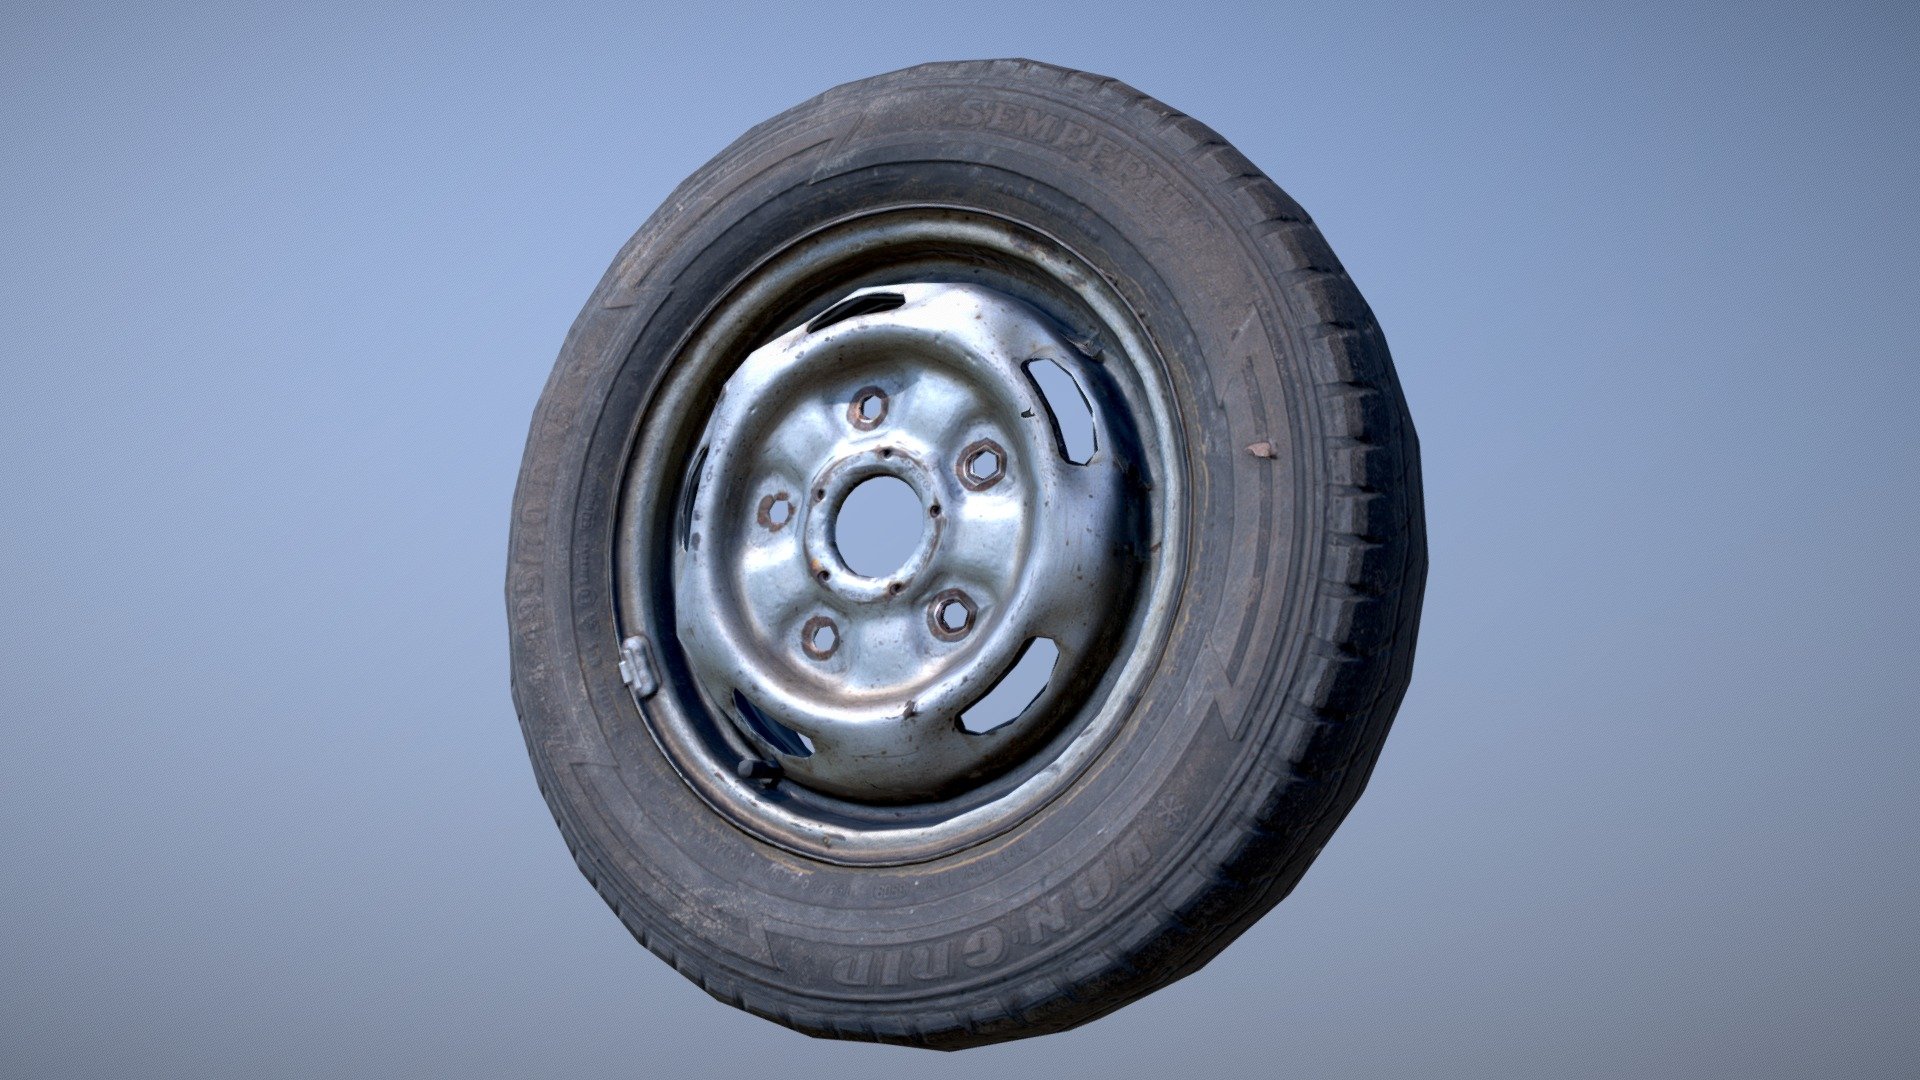 Highly Detailed Car Tire photoscan model. 360 Degrees, decimated, cleaned, UV'ed &amp; PBR Textured.
Texture Set




2048x2048 / PNG

Albedo (Diffuse) / Roughness / Metallic / Normal / Ambient Occlusion

Vertex Count




1.3k Vertices 

Additional information




Real World Scale

Z up

Free of all legal issues as all branding and labels are adjusted.

Retopologized by hand 

Additional files




None

Disclaimer
If you need any support, assistance or feedback, you can comment below or mail me and I will respond as quickly as possible.
High Poly Scan and Texture available upon request. 

Check out my other models and photoscans by following the link below.

Contact: hello@notoir.xyz 

More: https://notoir.xyz/featured-links/

Follow me on:
Instagram
Twitter
Artstation - Car Tire / Photoscan / Low Poly PBR - Buy Royalty Free 3D model by ACT NORMAL (@Notoir) 3d model